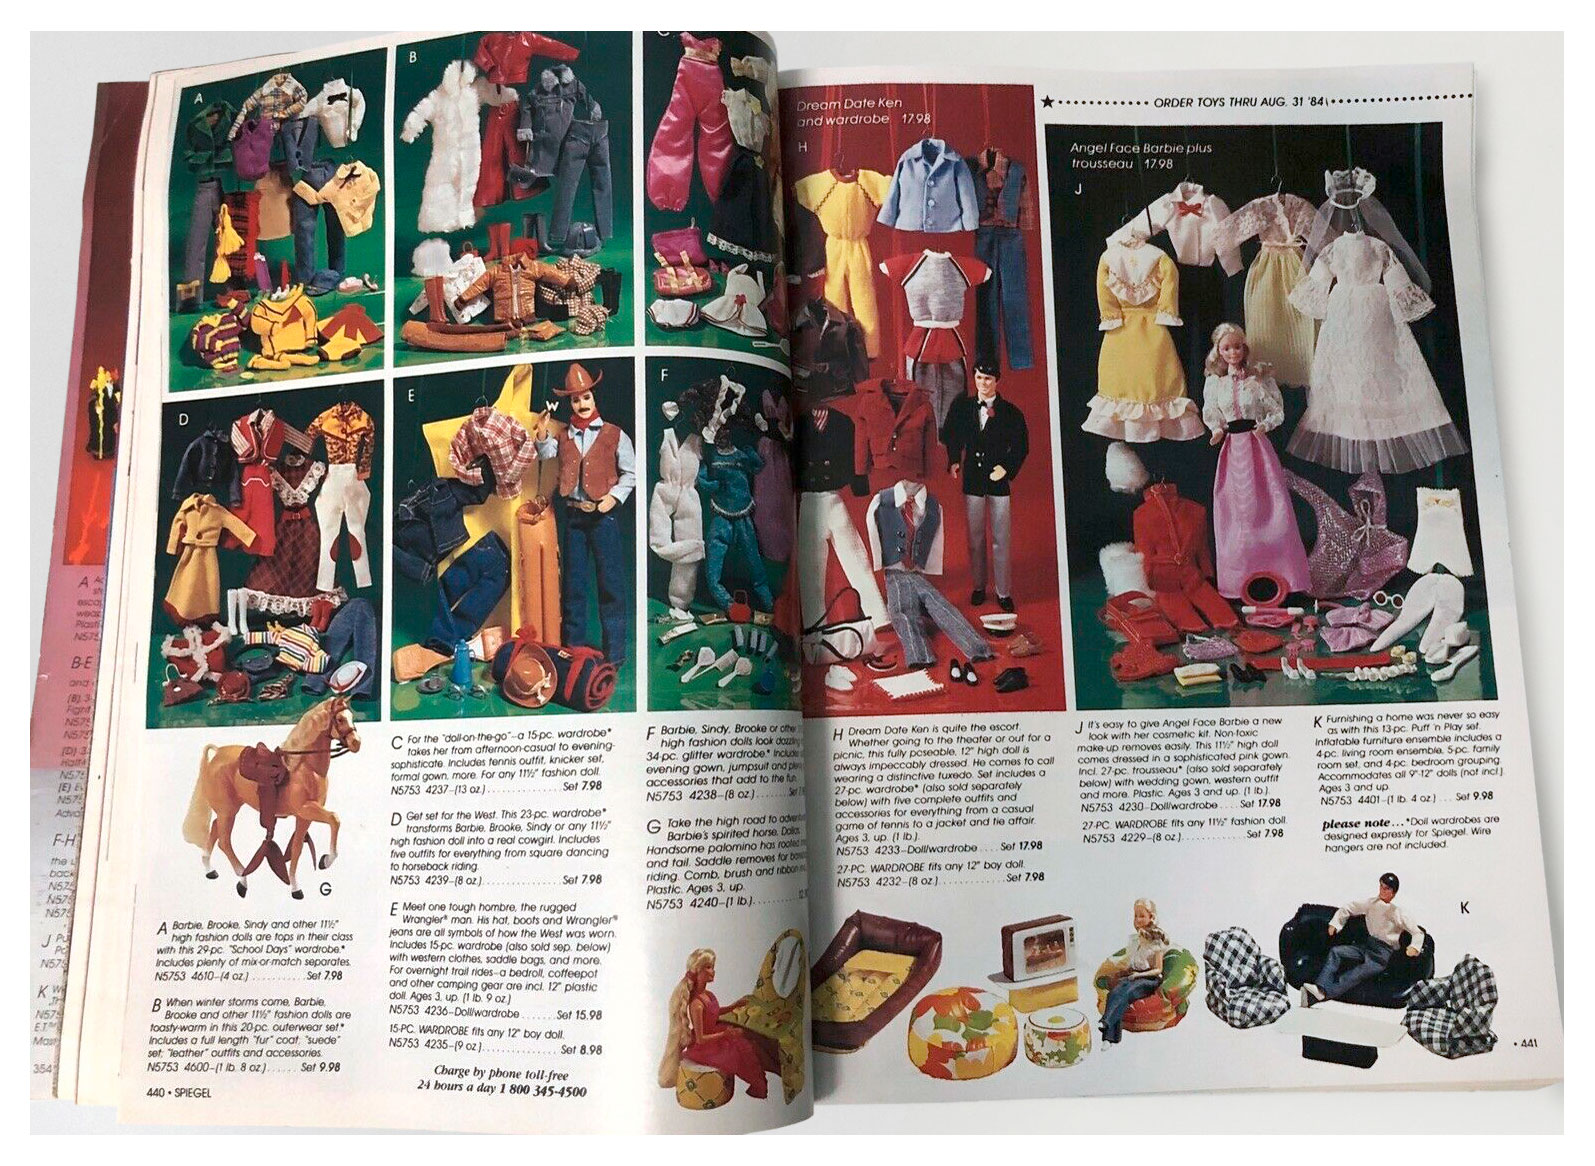 From 1983 Spiegel Christmas catalogue